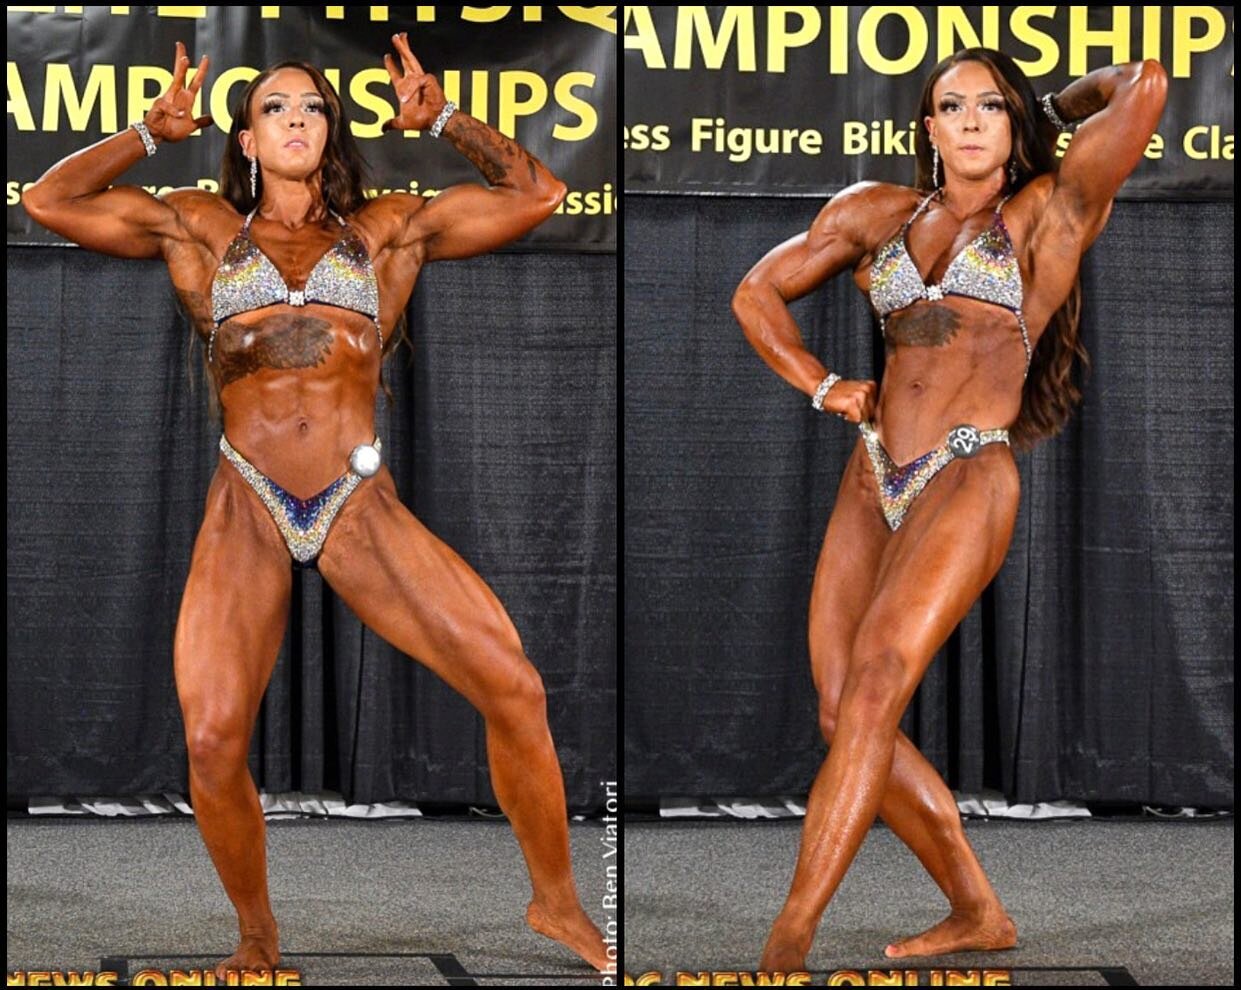 Shout to @__ashadams on her second place finish two weekends ago at the NPC Elite Physique Championships.
➖
This year has been a ride for Ashley. Since starting with LOUD a few years ago, Ashley has struggled with rebounding post-show. After competin